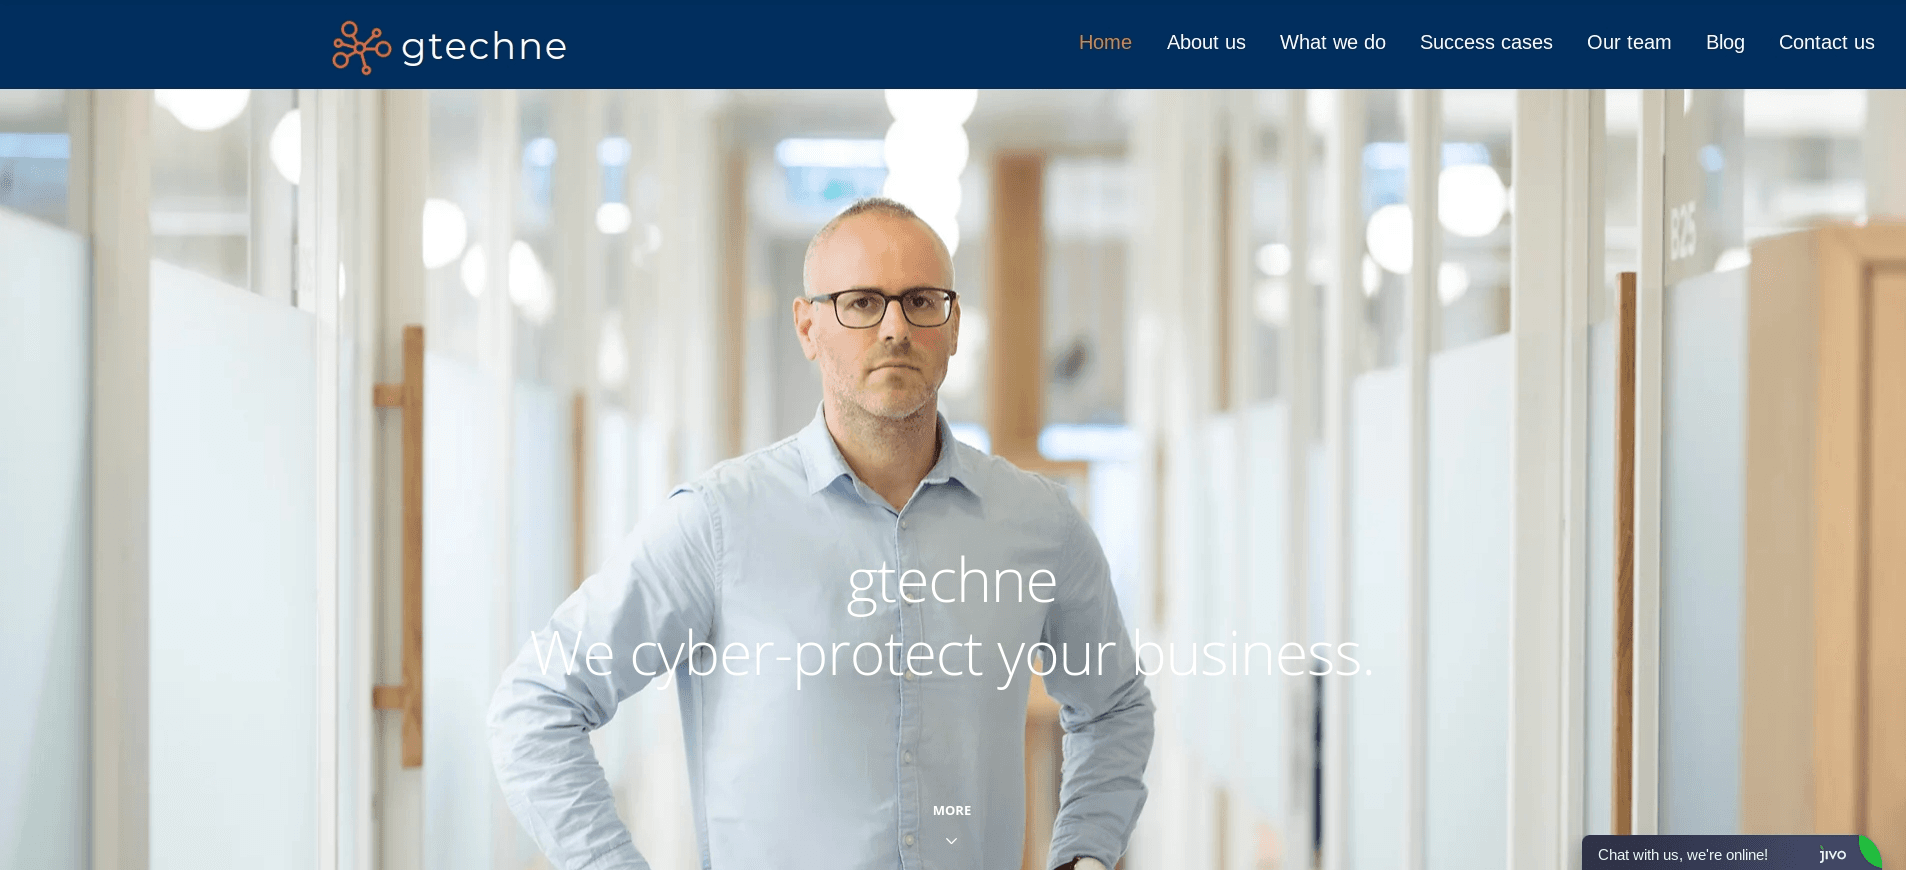 Product GAP - gtechne attack platform | Cybersecurity Central Florida image